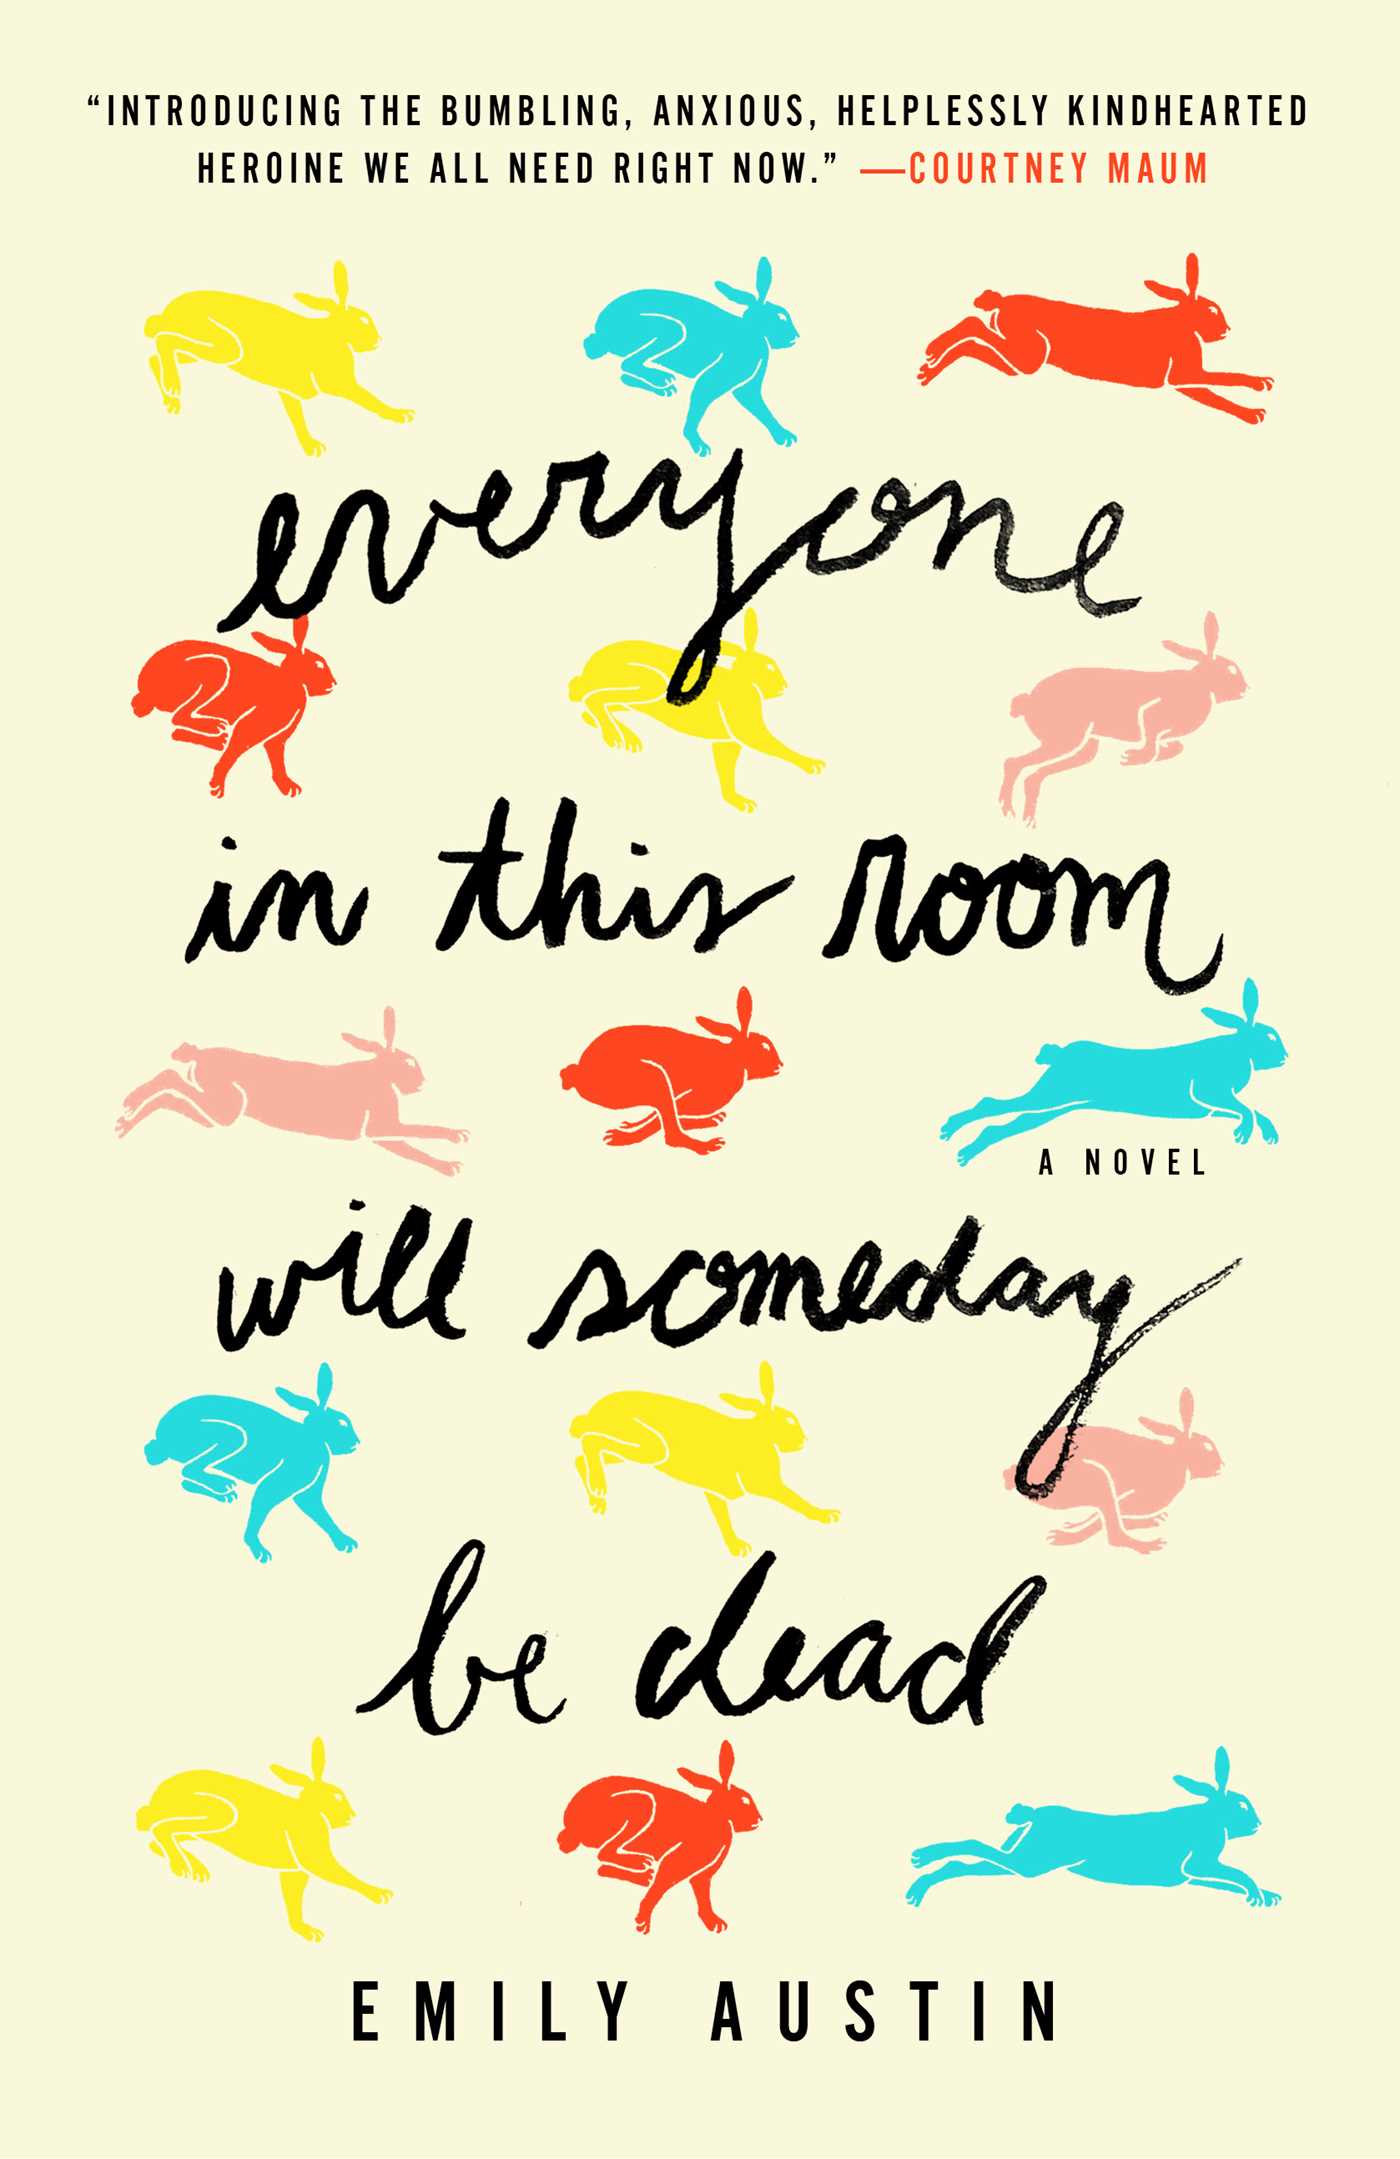 Everyone in This Room Will Someday Be Dead book jacket